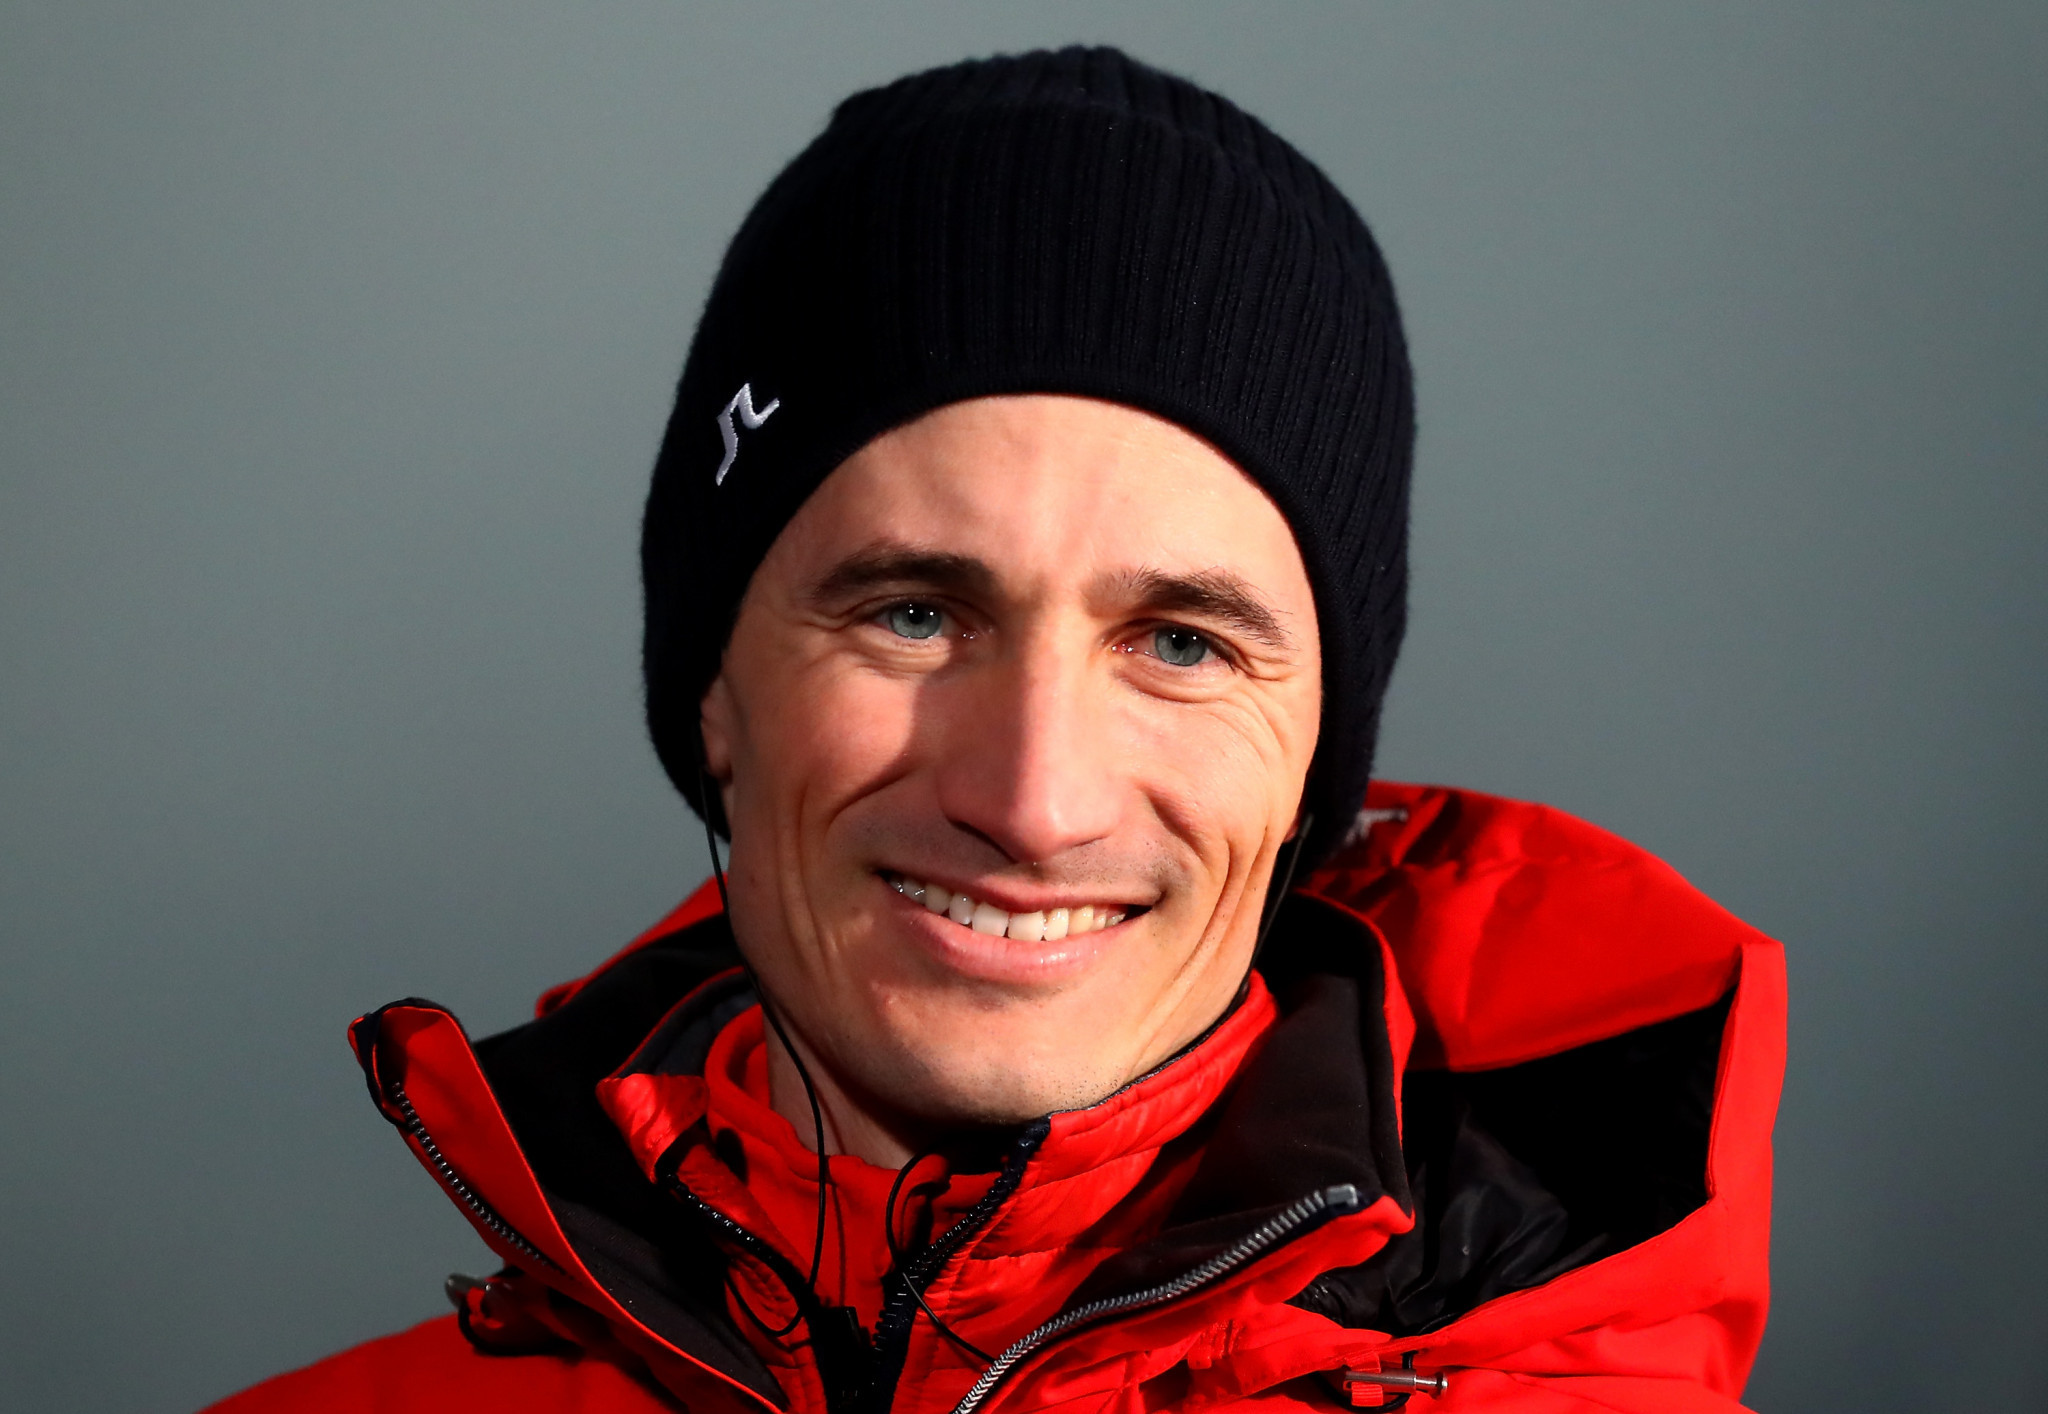 Former Olympic gold medallist Martin Schmitt has been appointed as a talent scout for the German Ski Association ©Getty Images